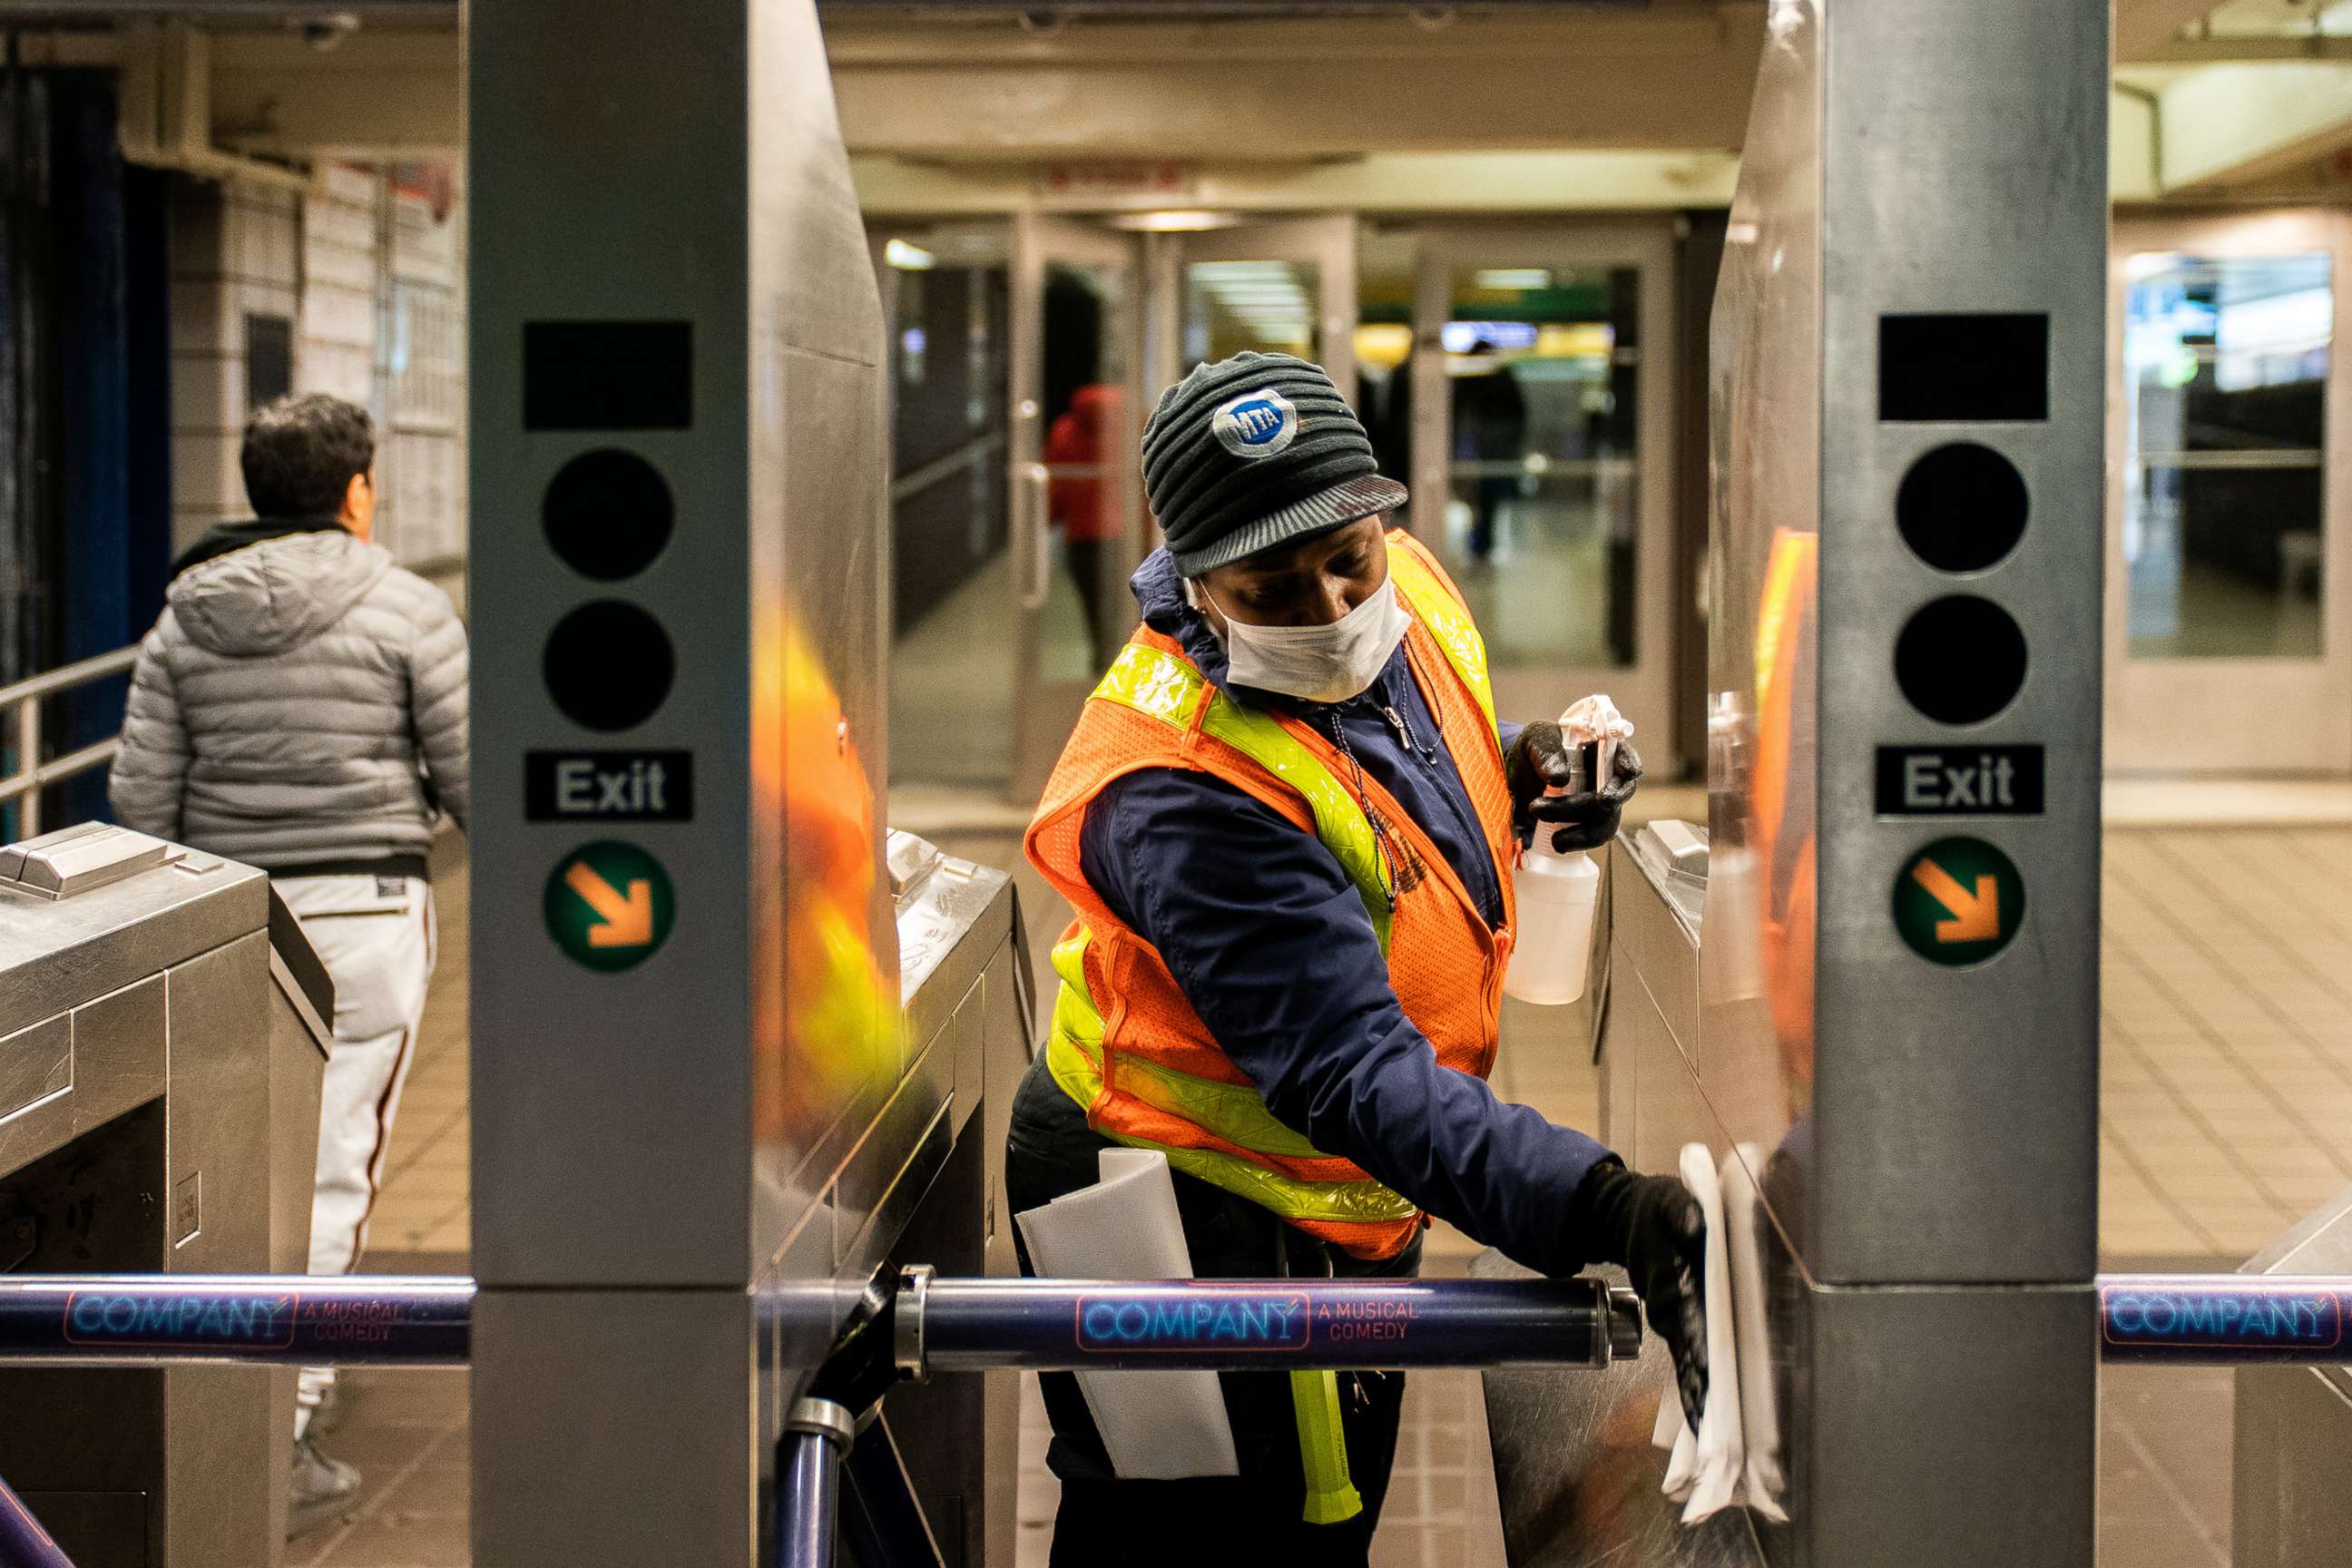 PHOTO: An MTA transit worker cleans a nearly empty Times Square - 42nd street subway station following the outbreak of the coronavirus, in New York City, March 16, 2020.